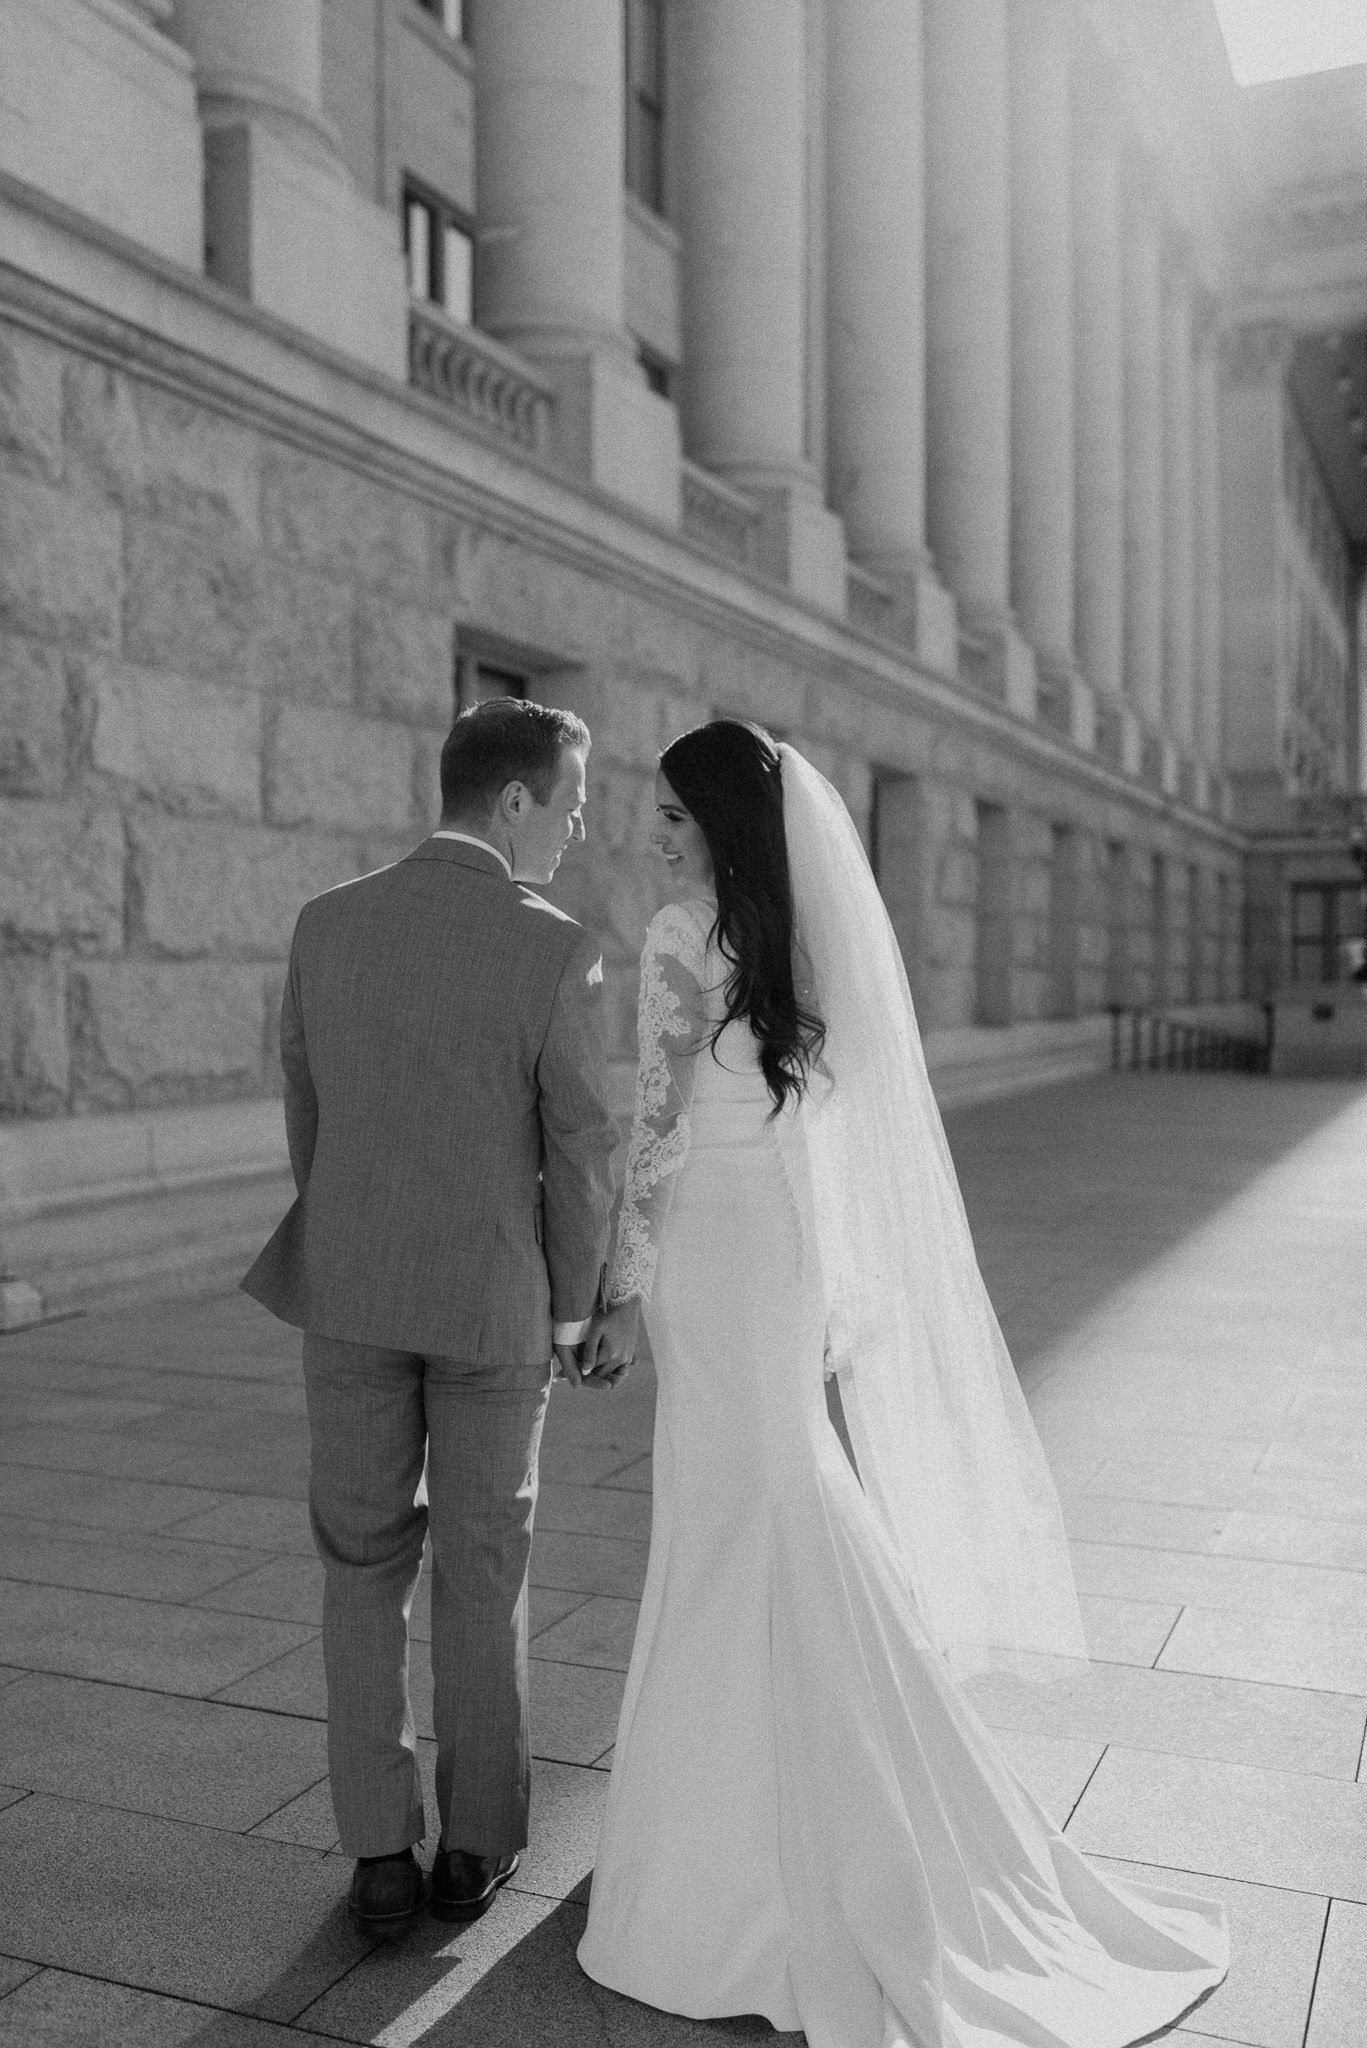 Utah-State-Capitol-Spring-Blossons-Bountiful-LDS-Wedding-Hopesandcheers-photo-15